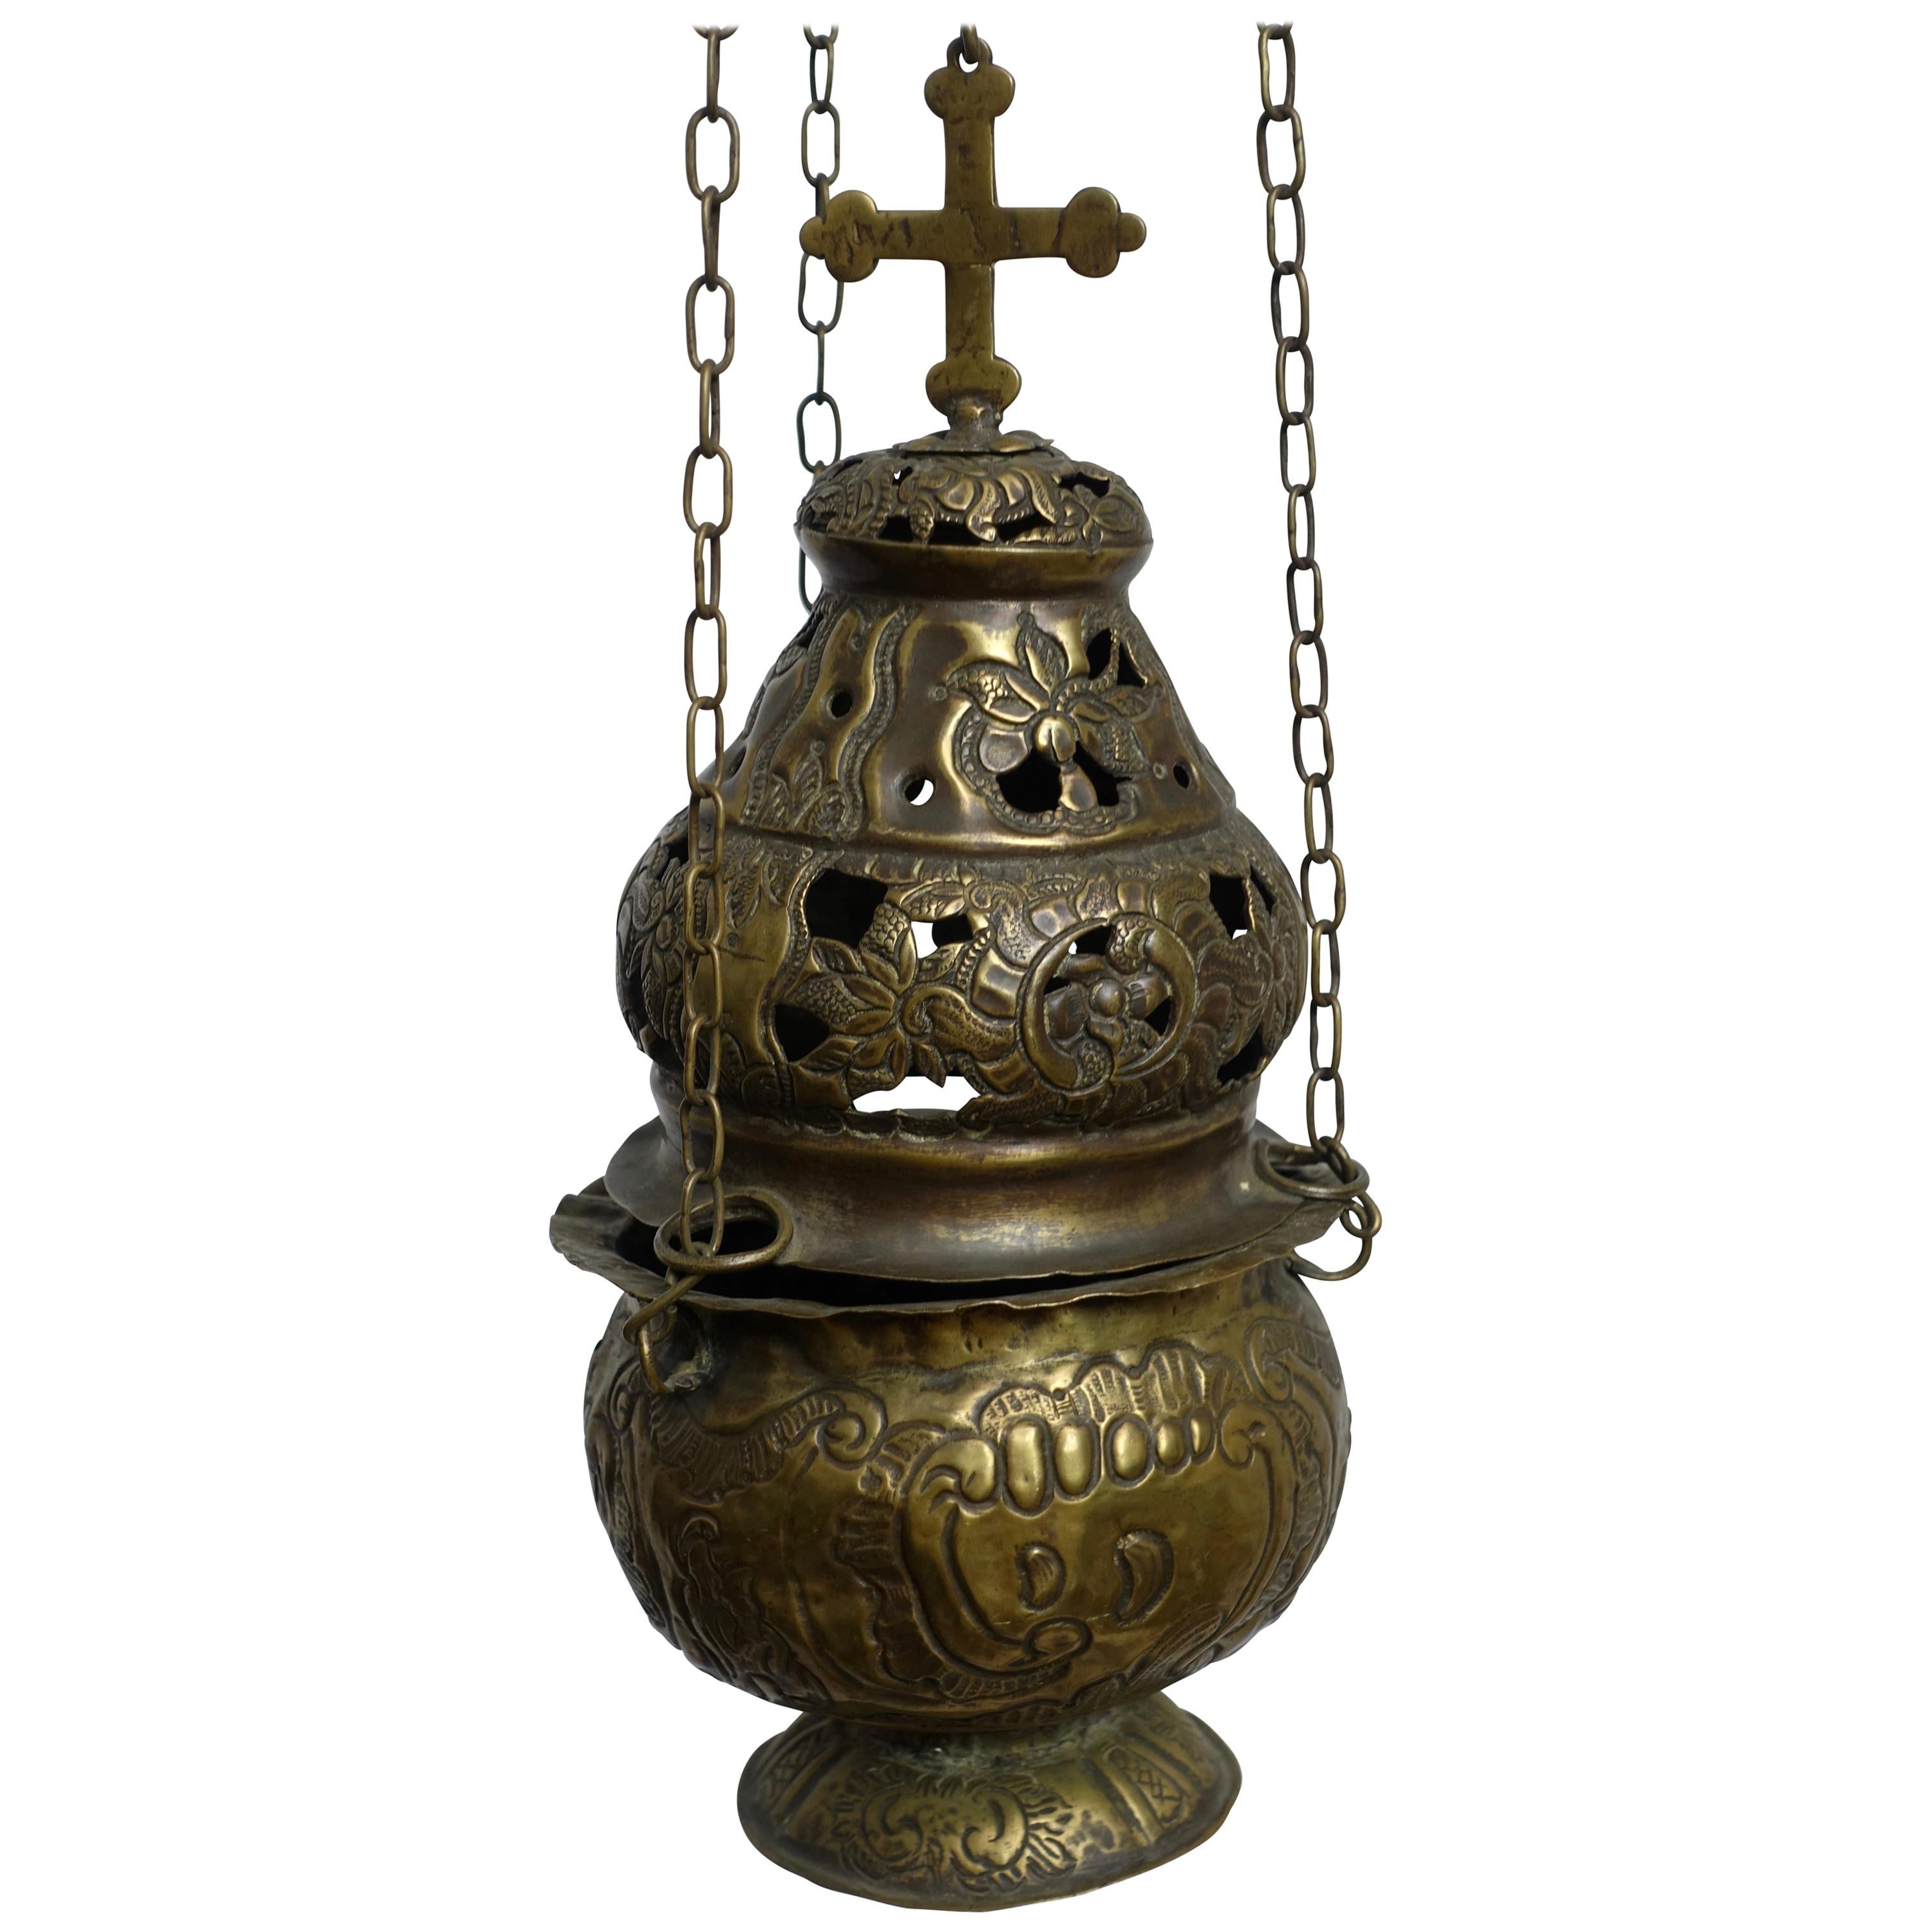 Religious Repousse Brass Hanging Incense Burner, Spanish Colonial, 19th Century